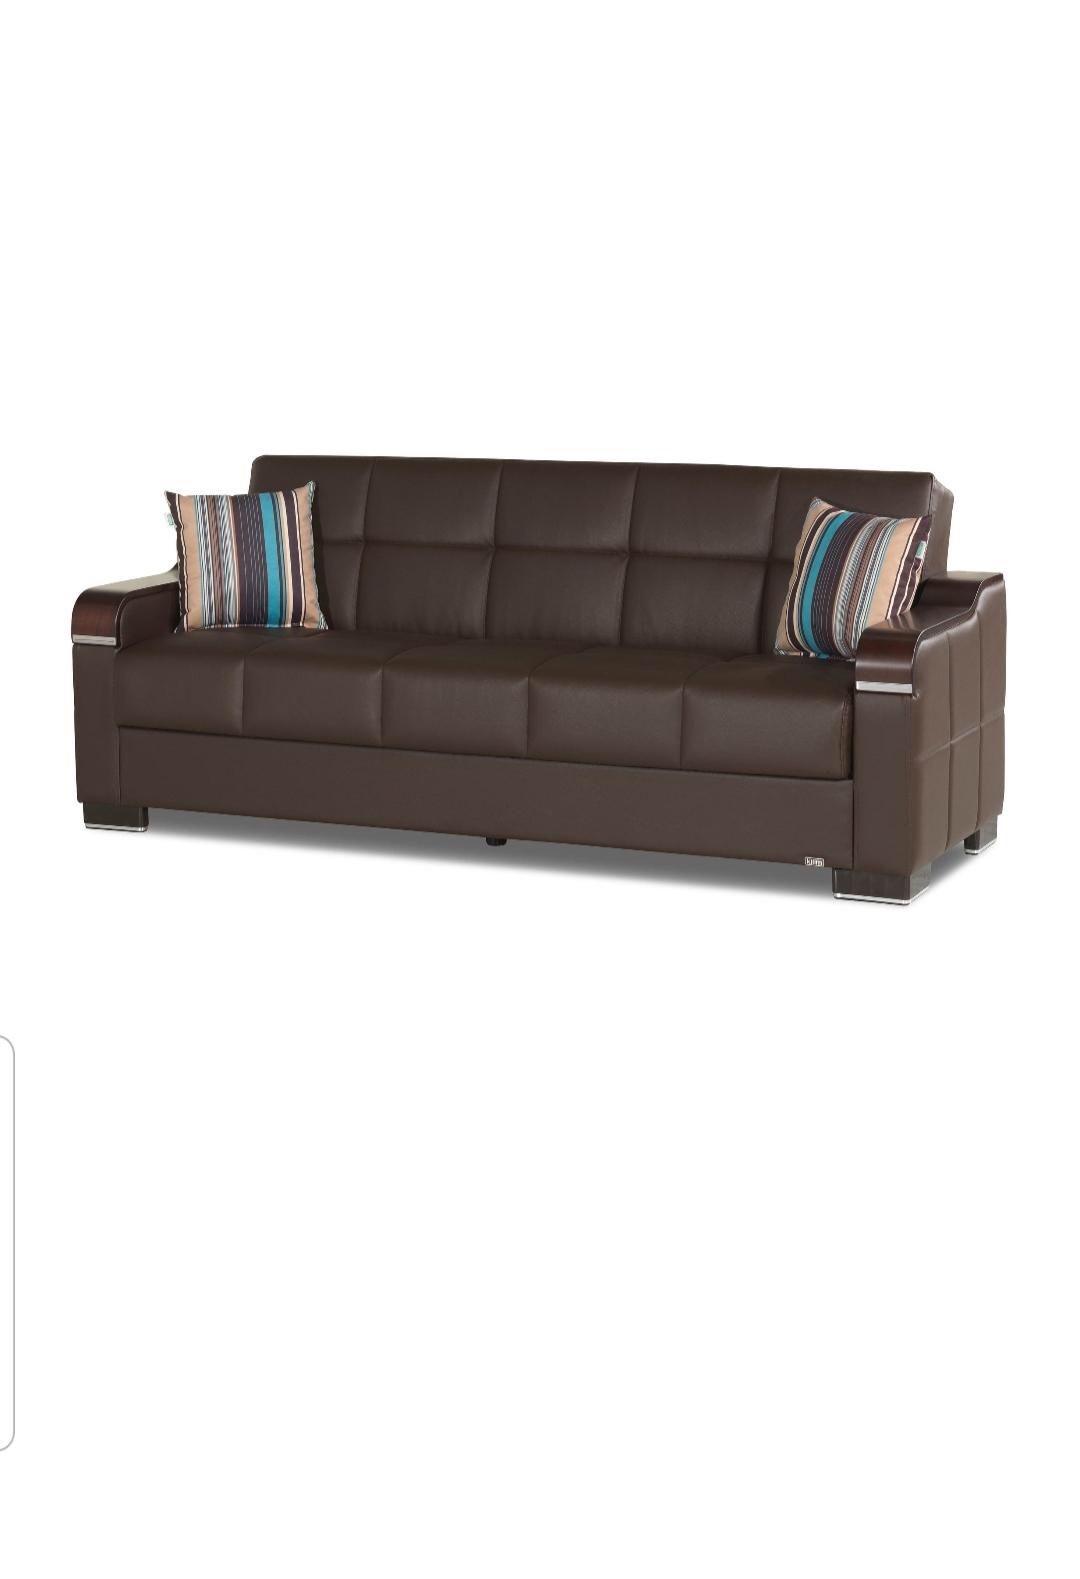 Uptown Brown PU Leather Convertible Sofa